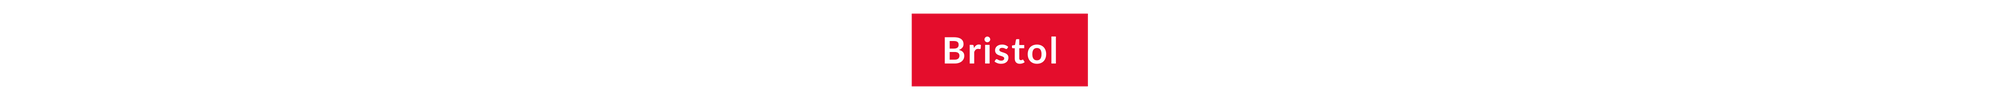 The word Bristol in a red block